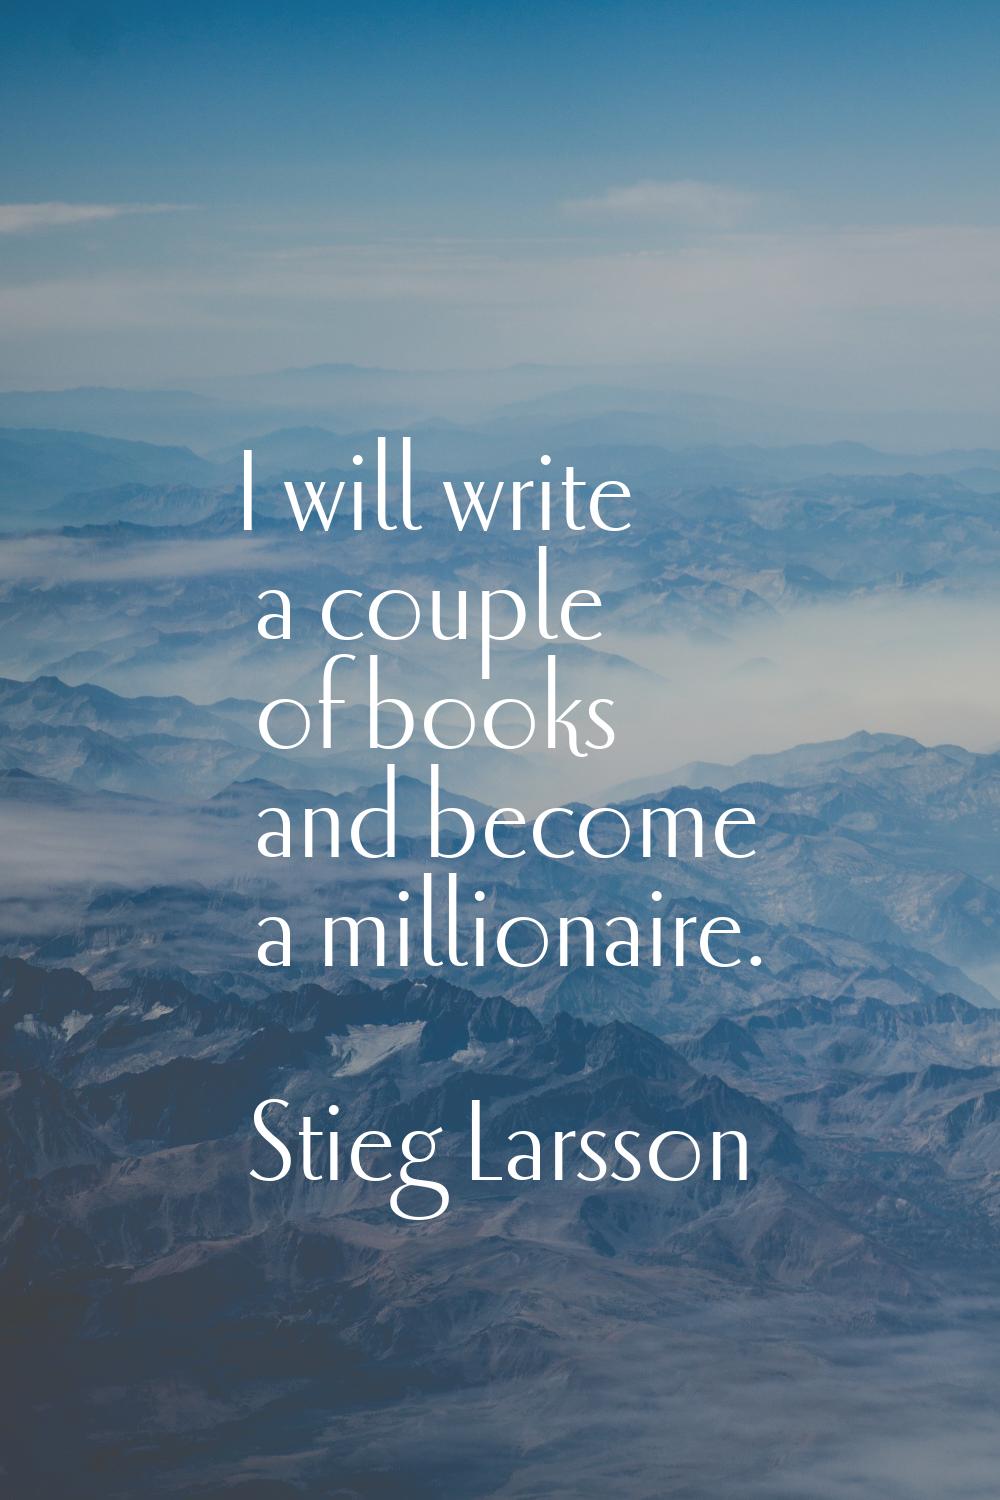 I will write a couple of books and become a millionaire.